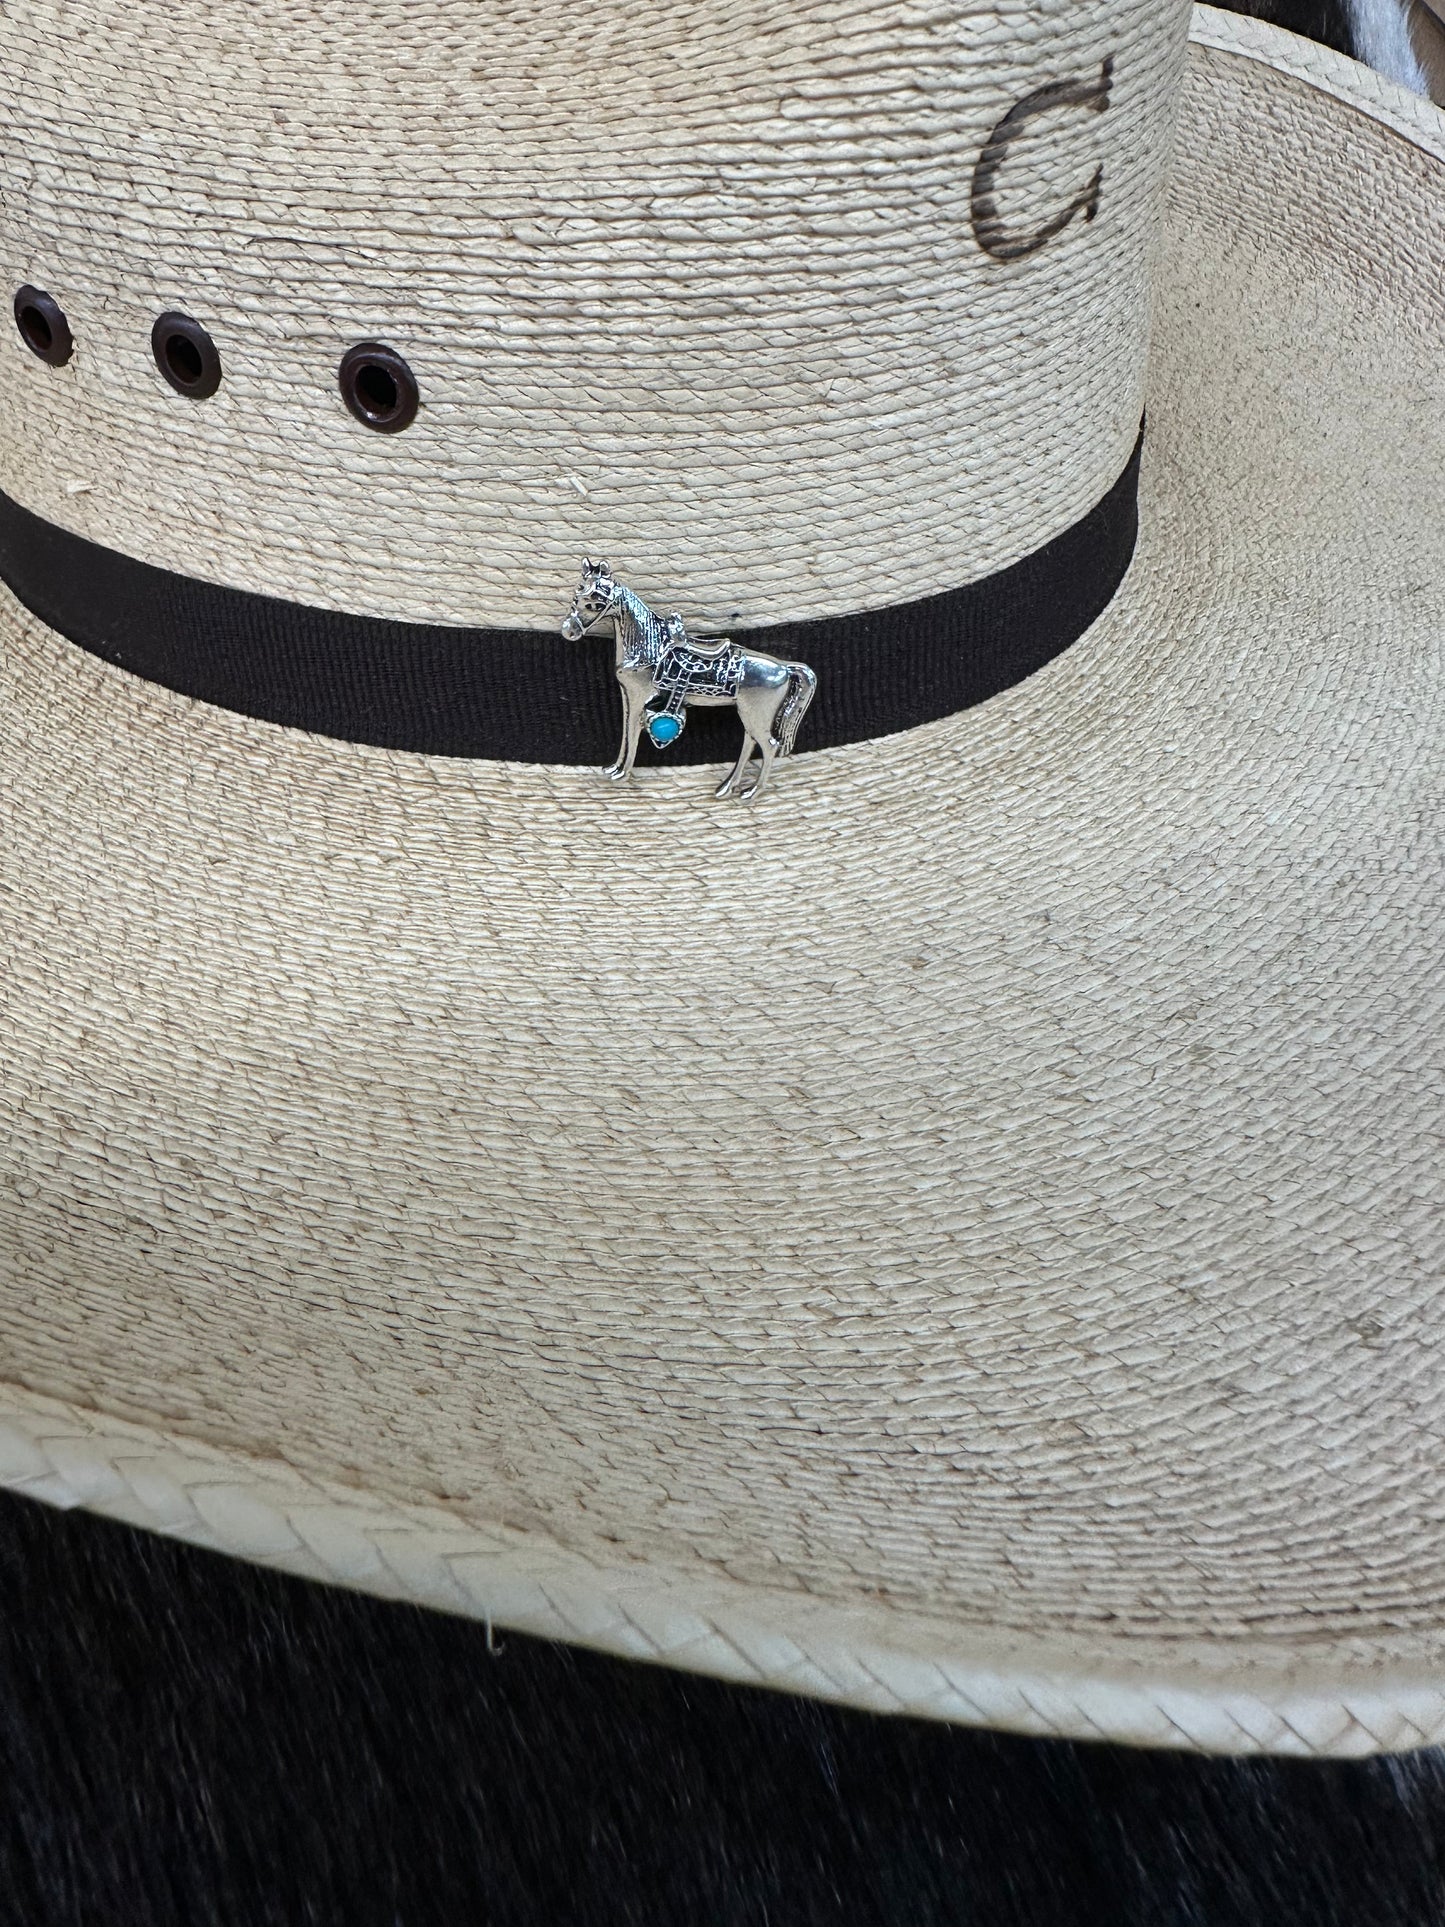 The Giddy Up Hat Pin